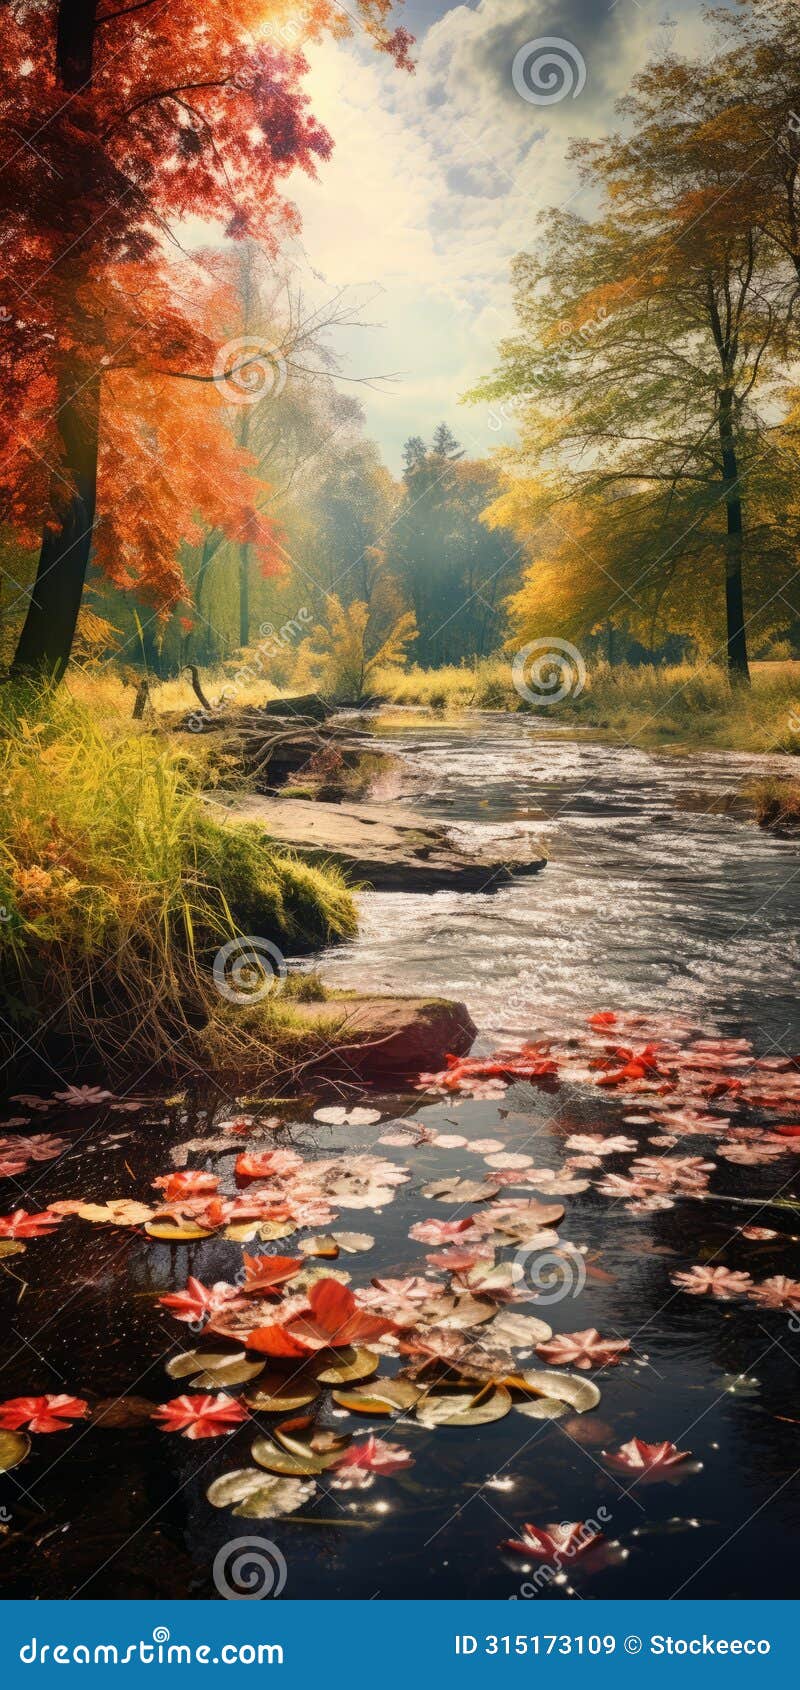 dreamy autumn river: a romantic and dramatic landscape with lively nature scenes